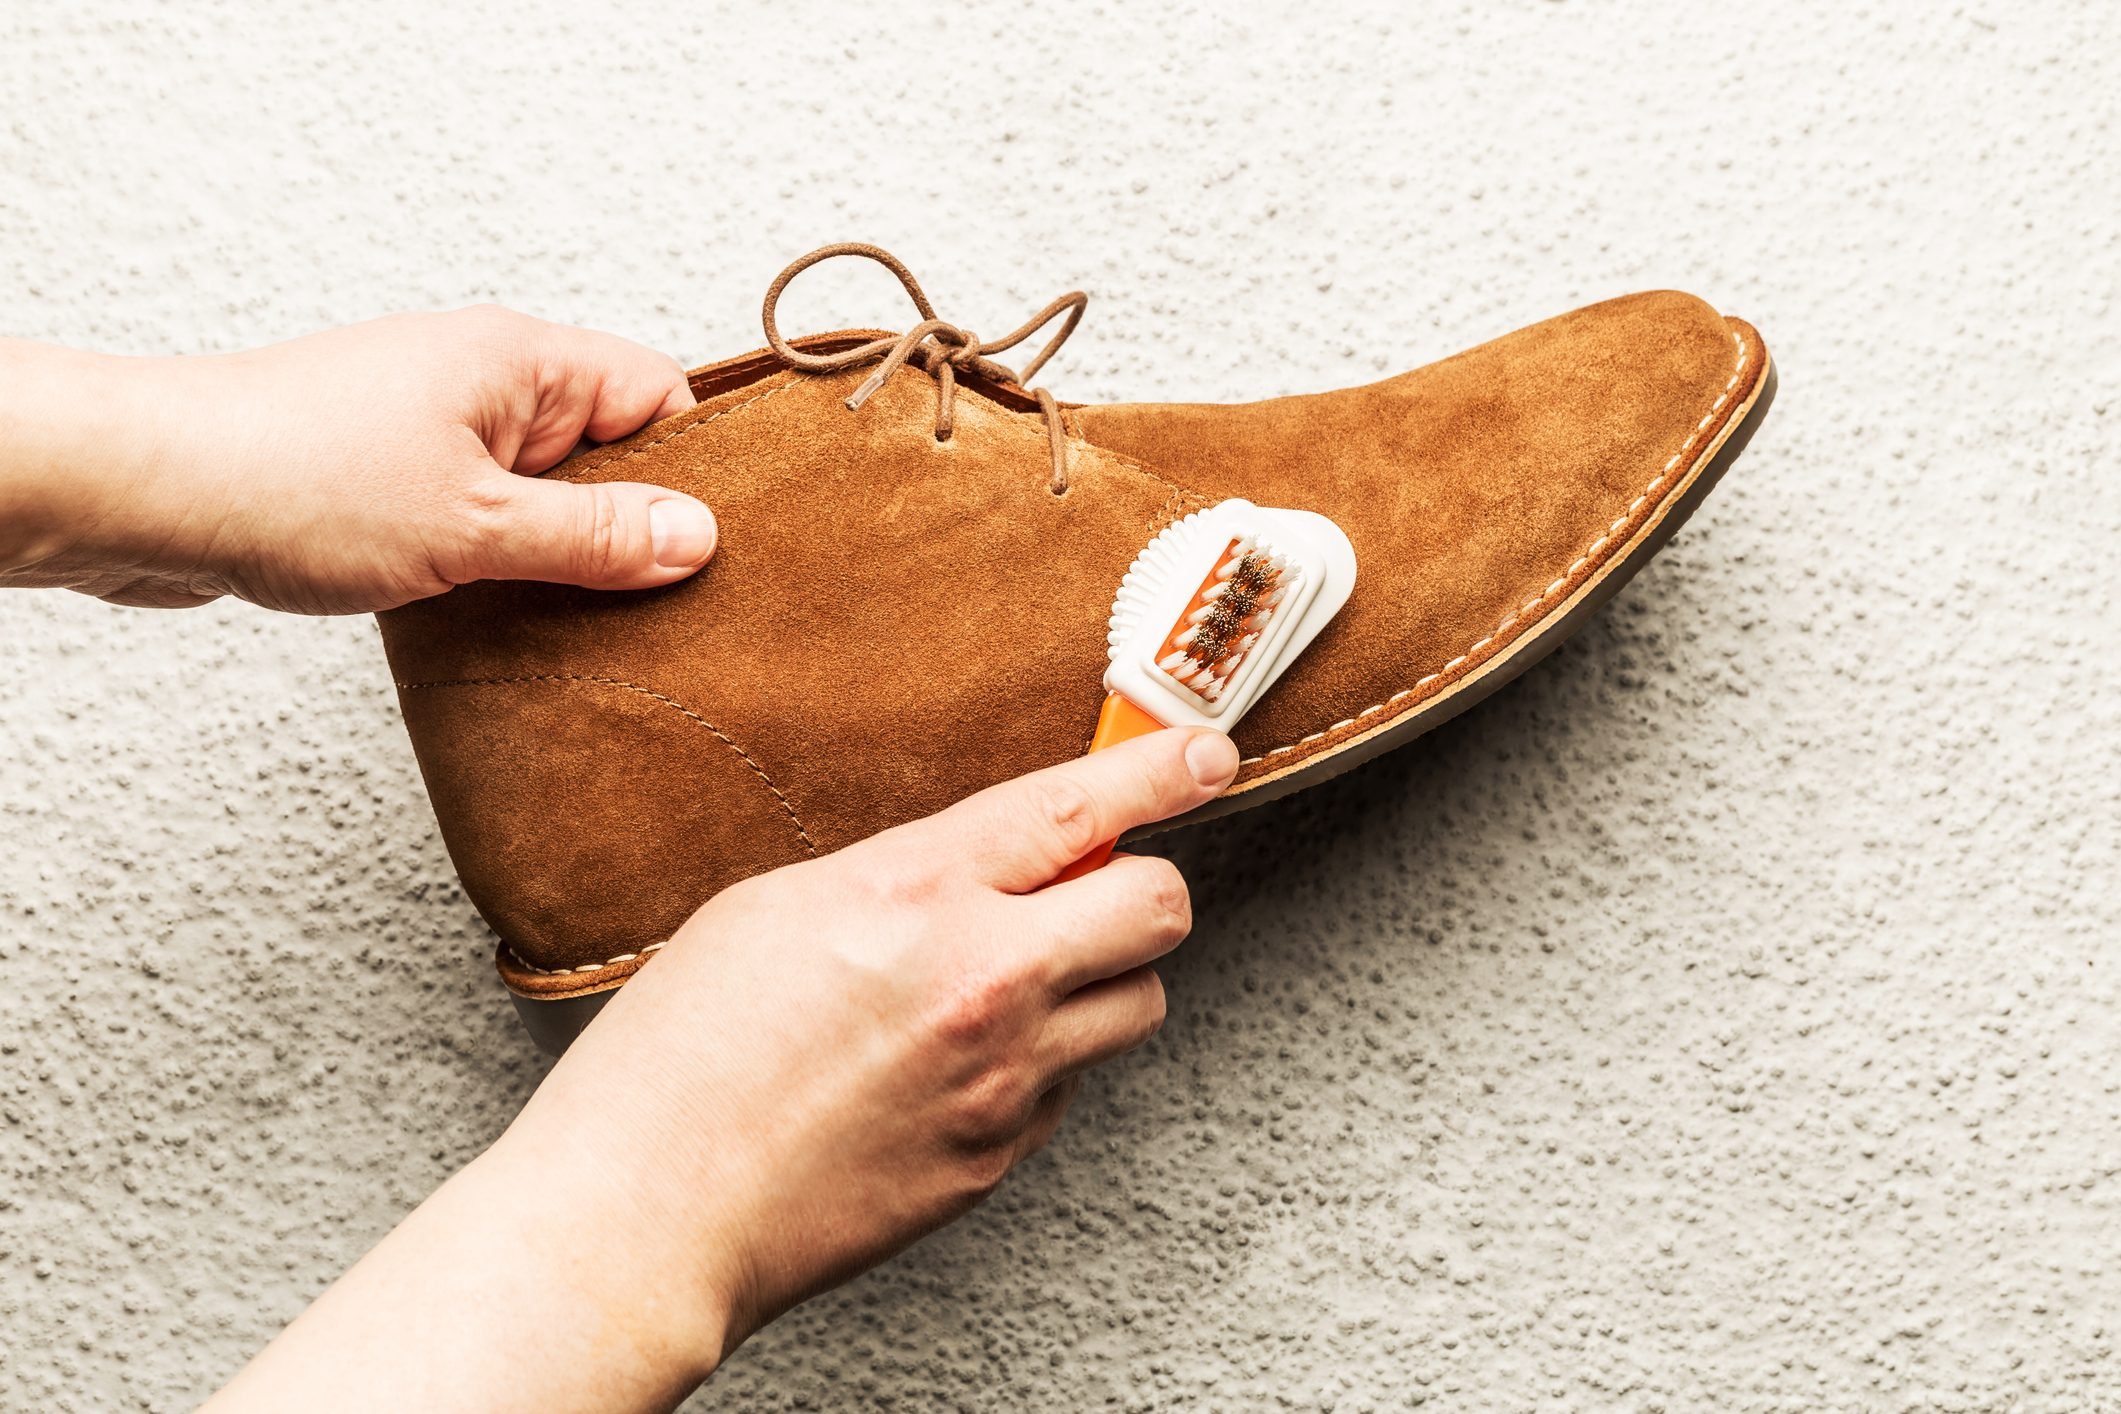 How to clean leather and suede using items you already have at home